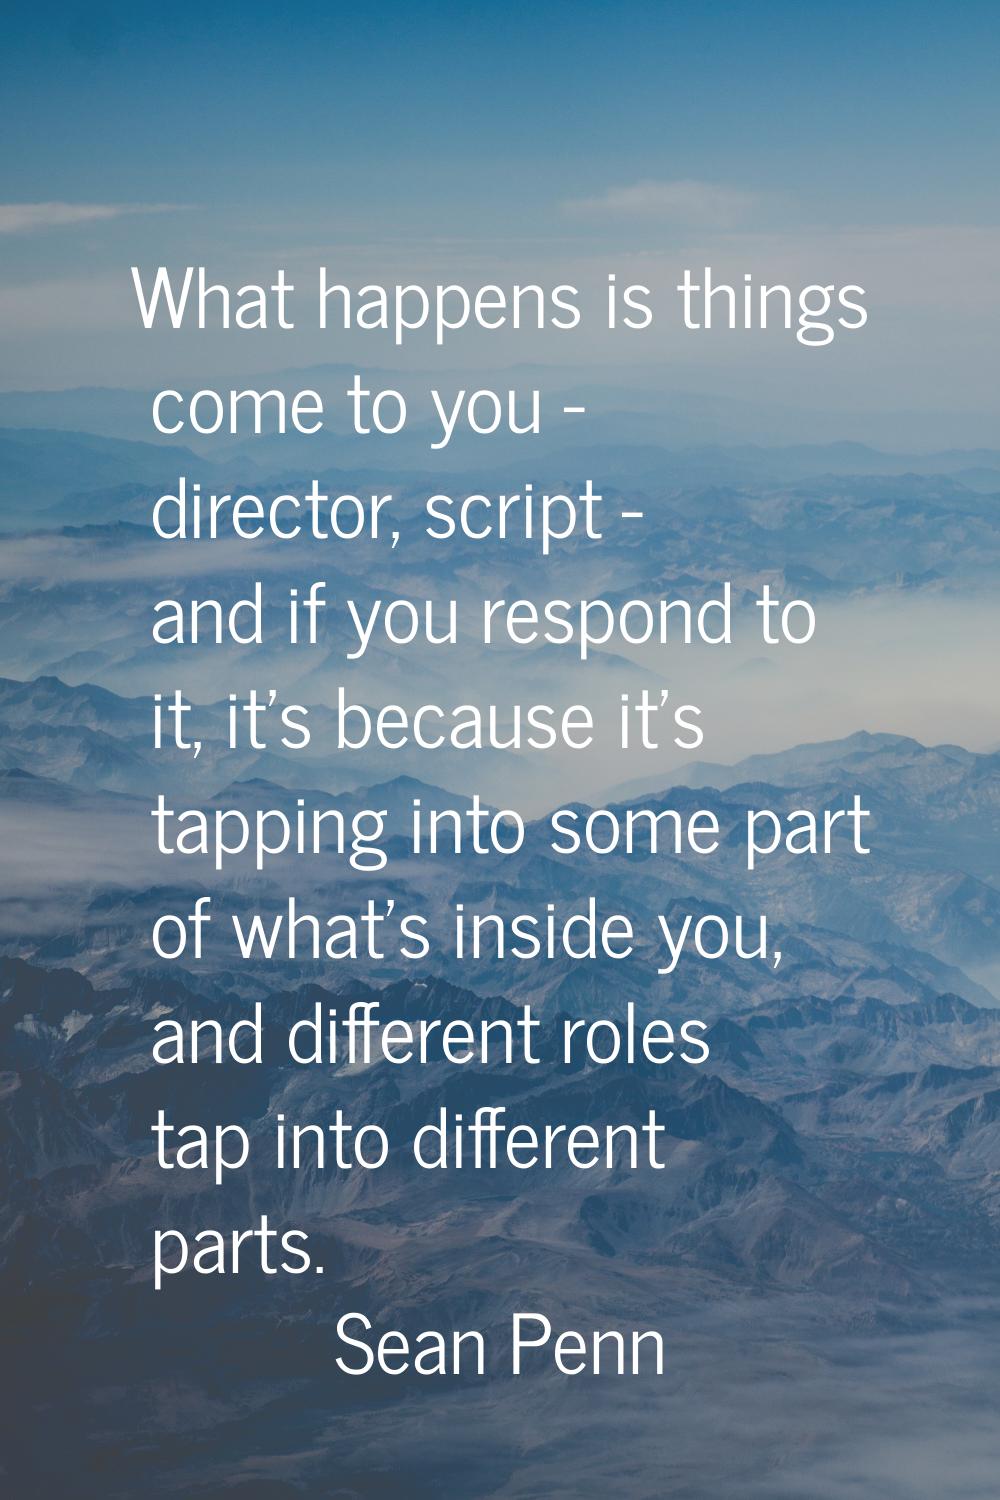 What happens is things come to you - director, script - and if you respond to it, it's because it's